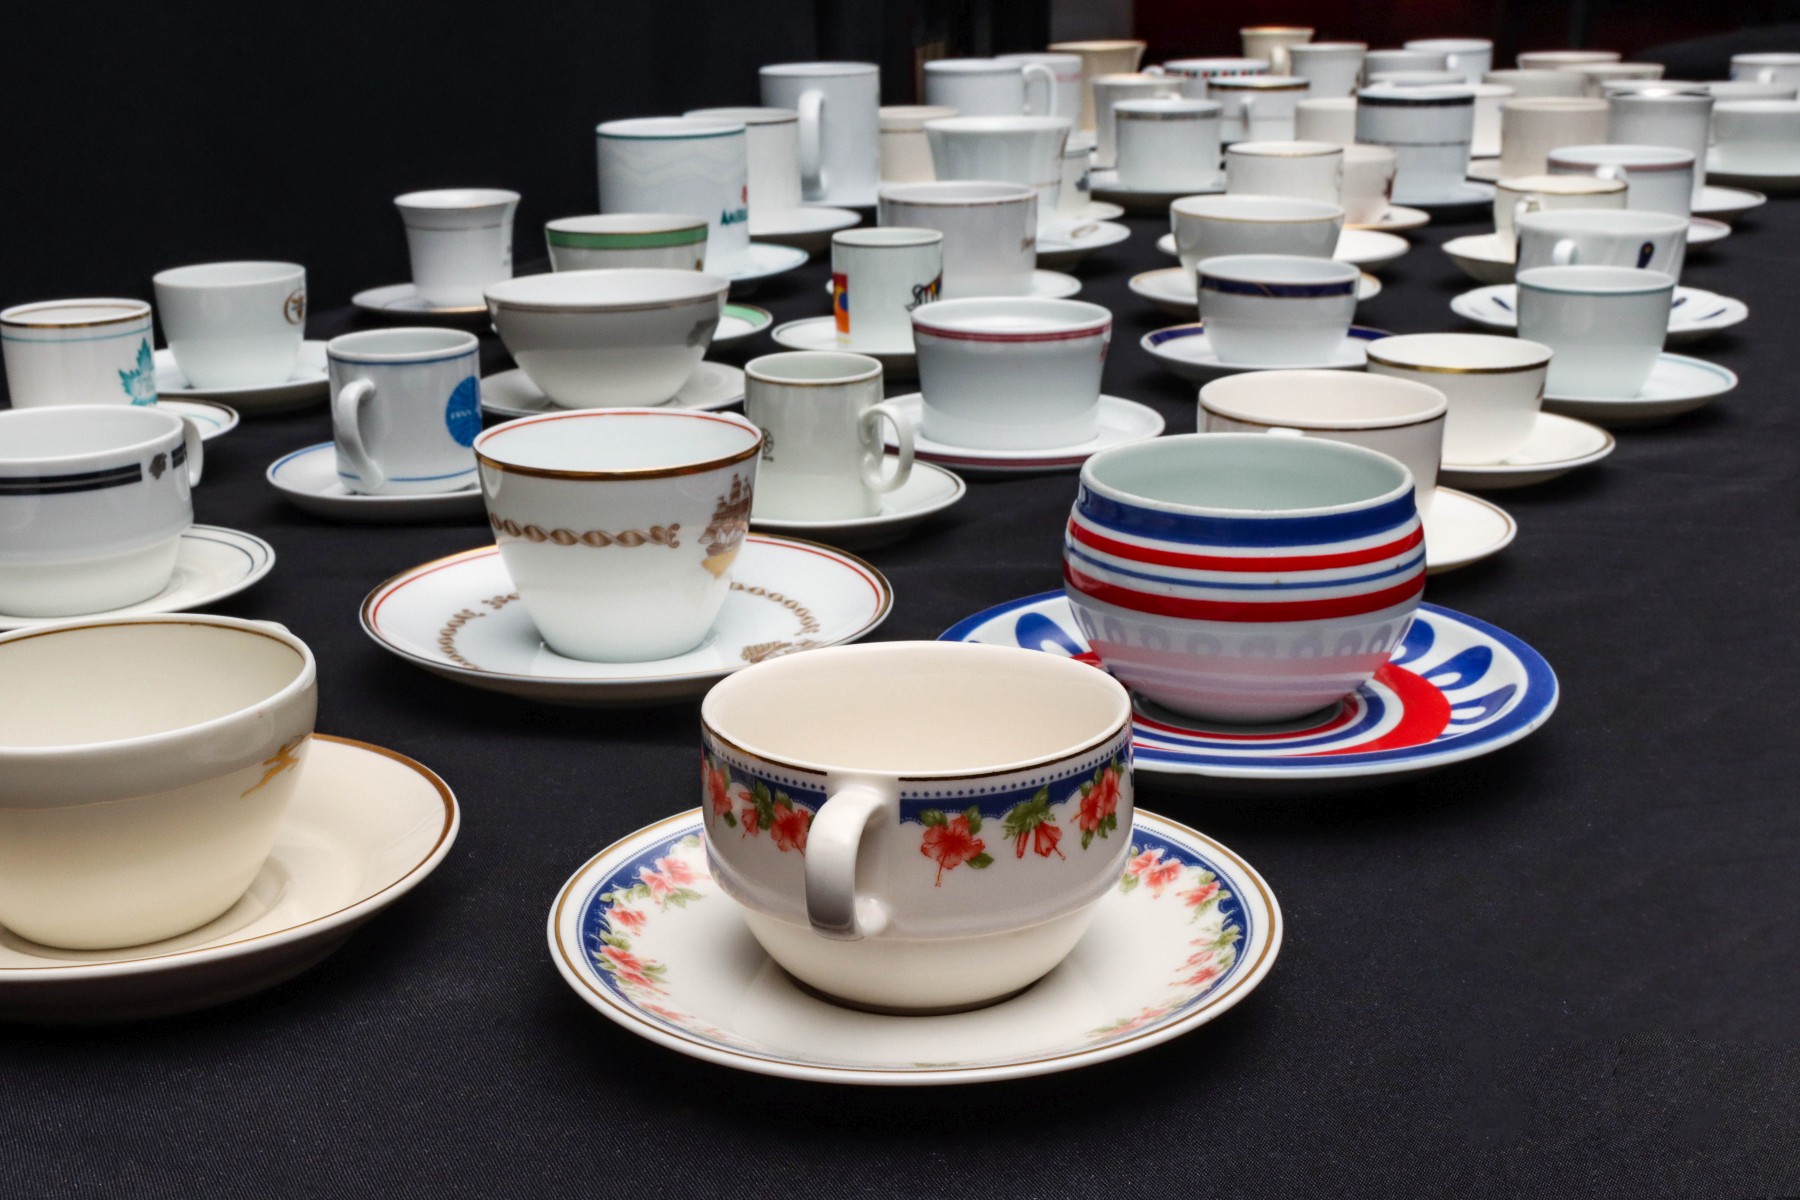 A COLLECTION OF 114 AIRLINE DINING CHINA CUP/SAUCER SETS